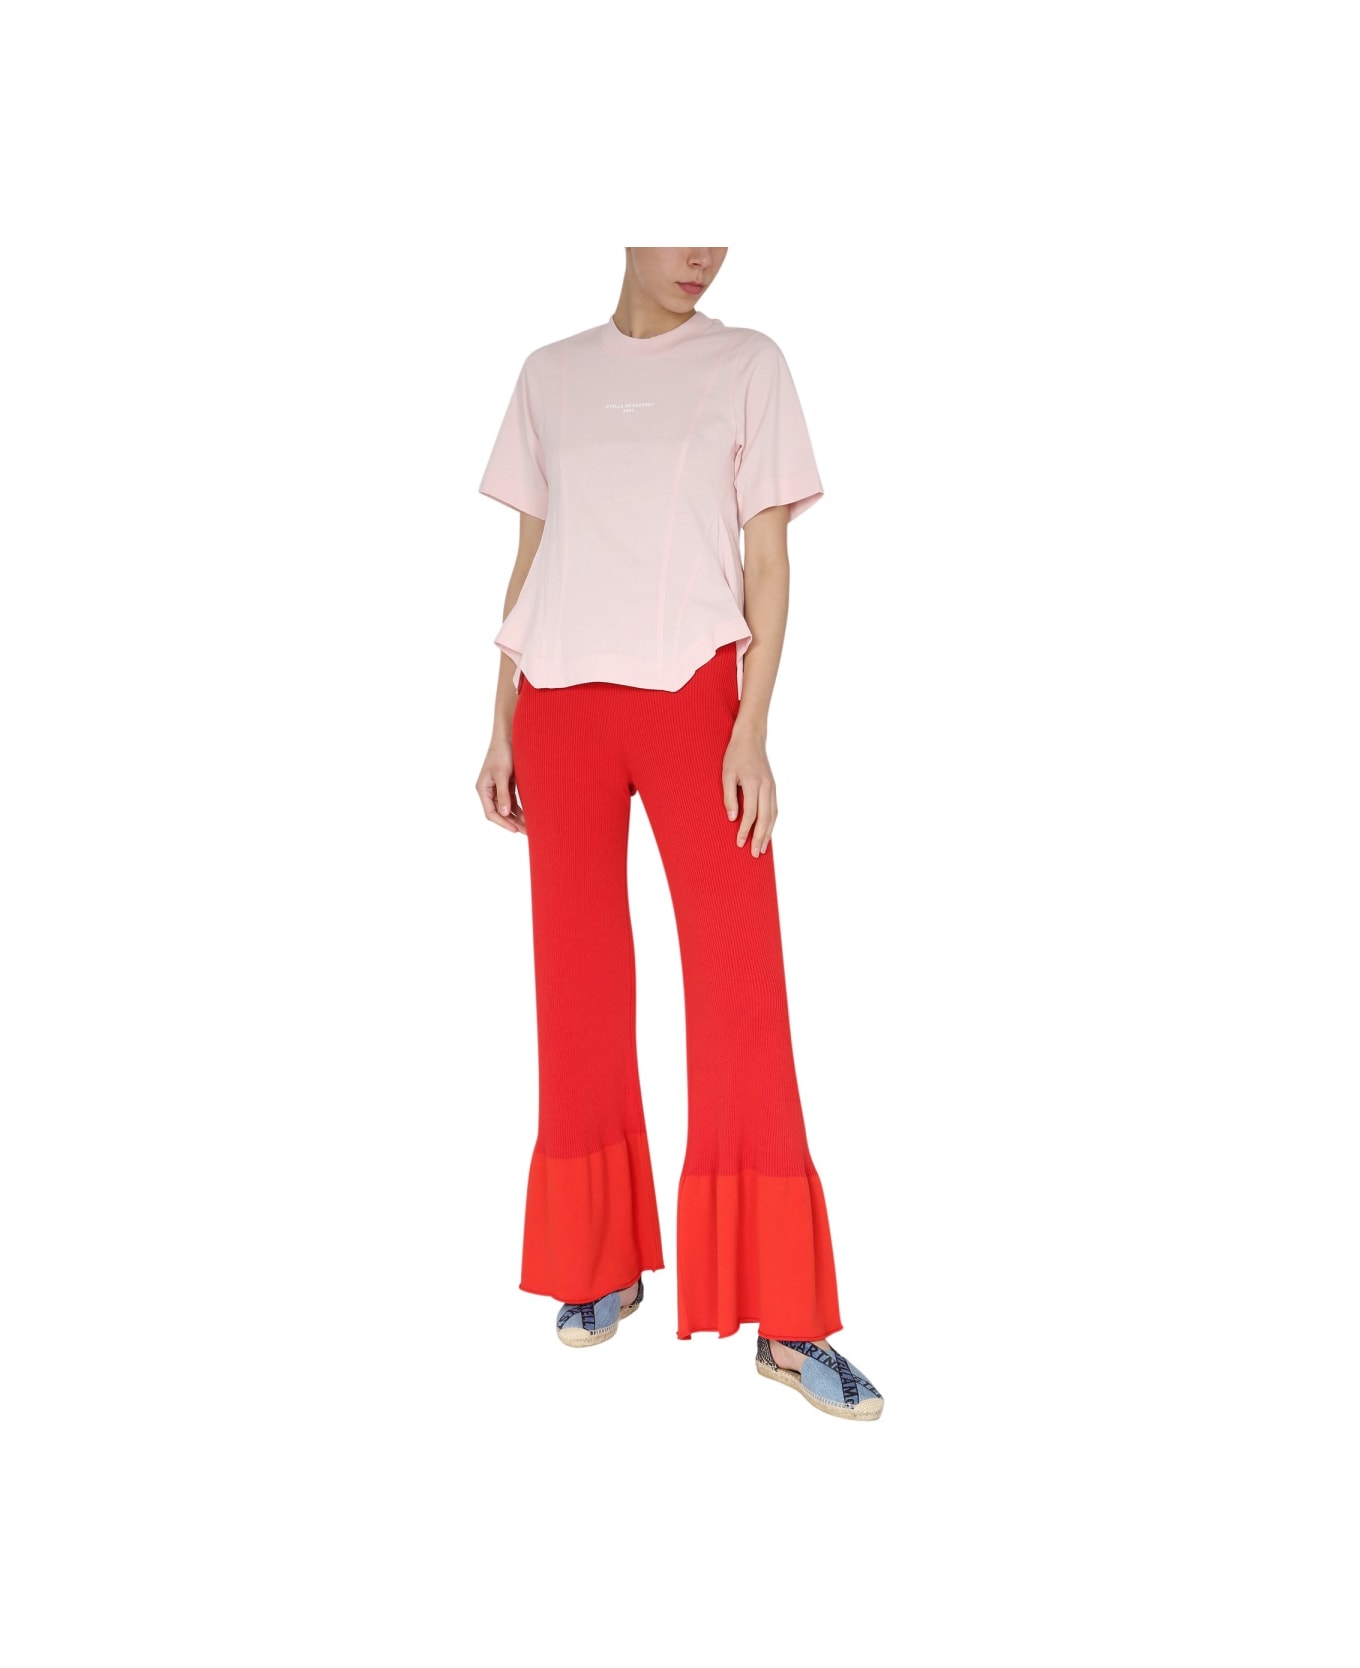 Stella McCartney Ribbed Knit Trousers - RED ボトムス